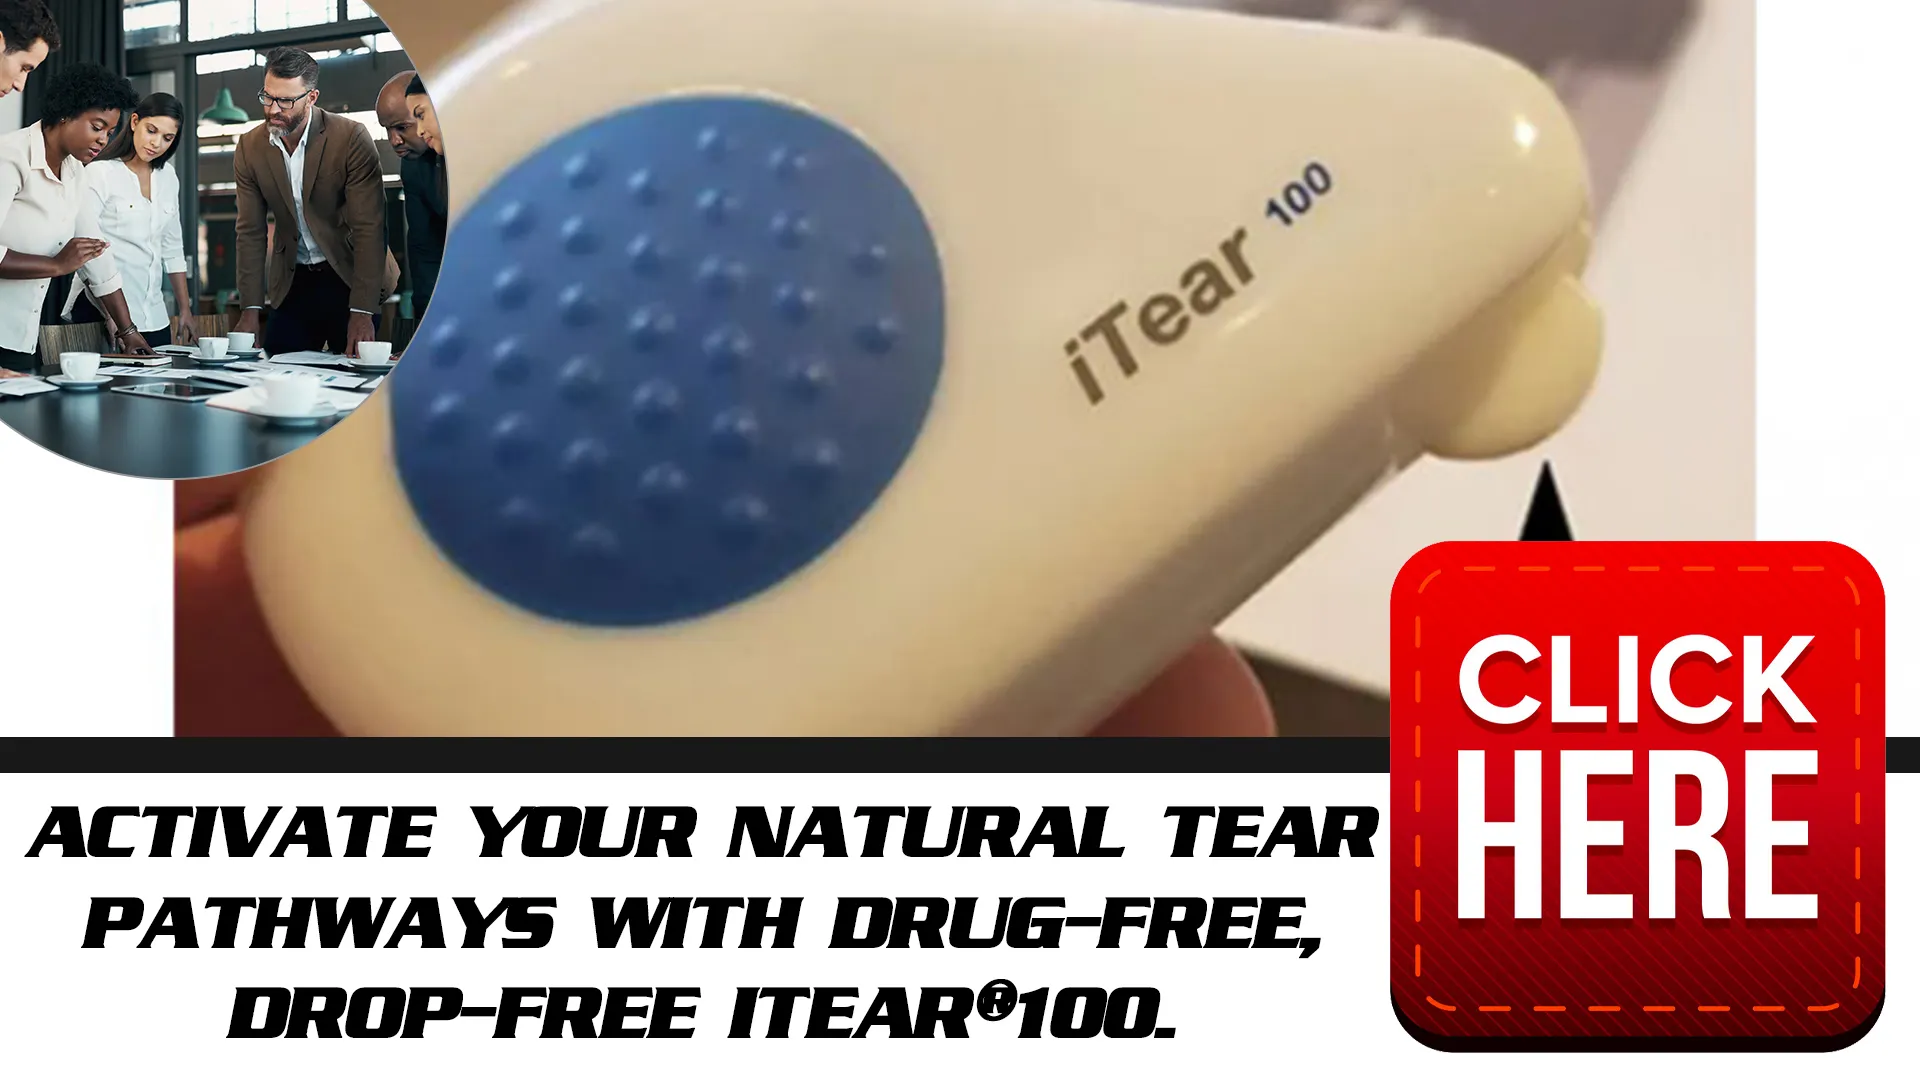 The Innovative Solution: iTEAR100